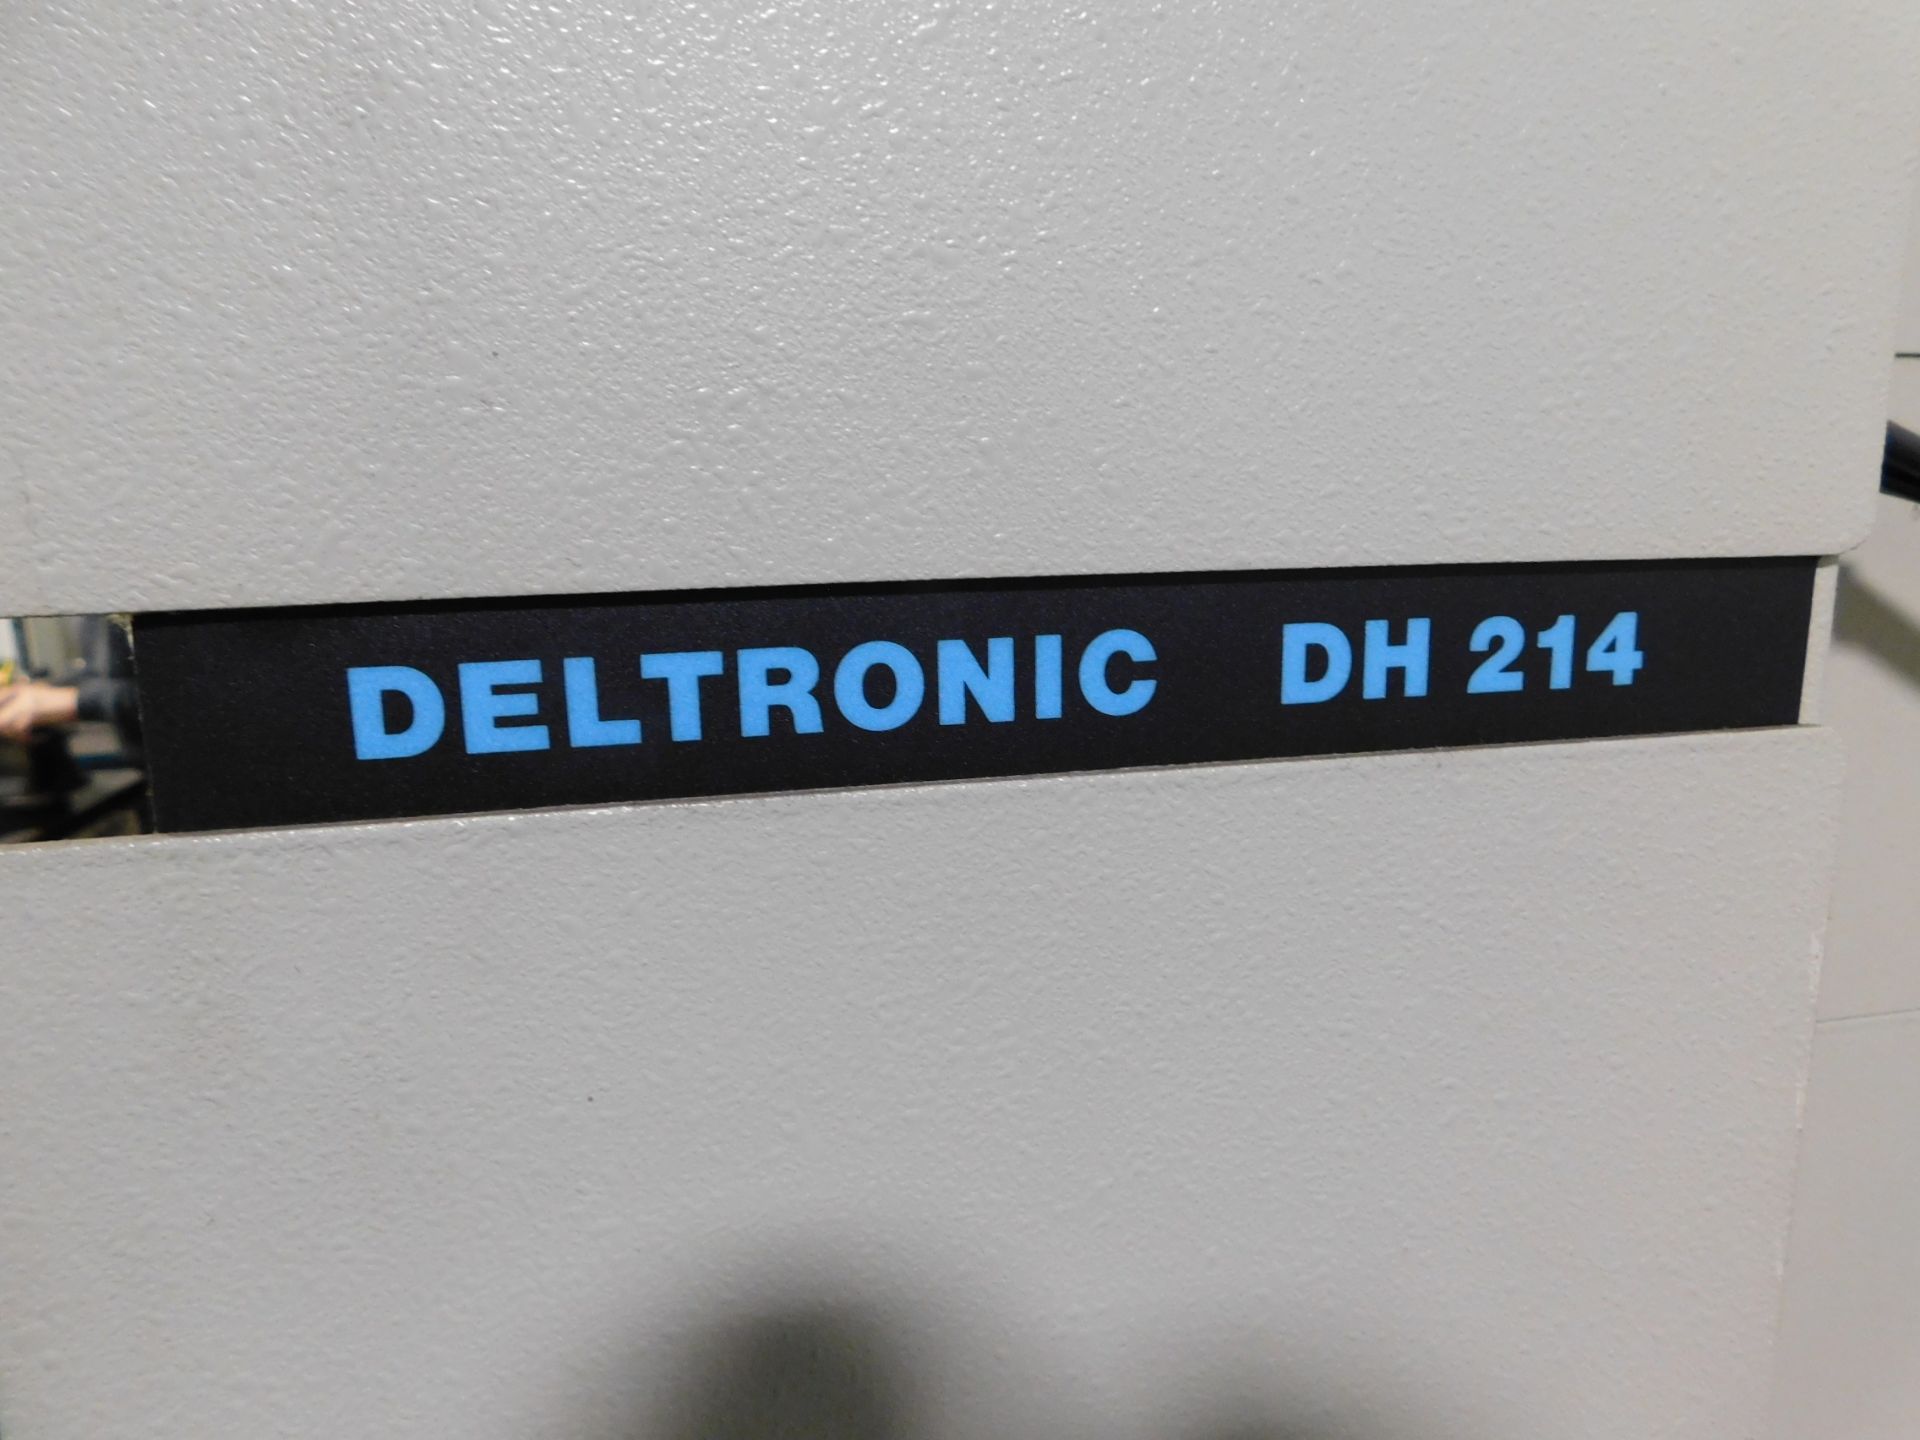 Deltronic Model DH-214 Optical Comparator sn# 259124380,14", Deltronic MPC-5 Processor - Image 7 of 8